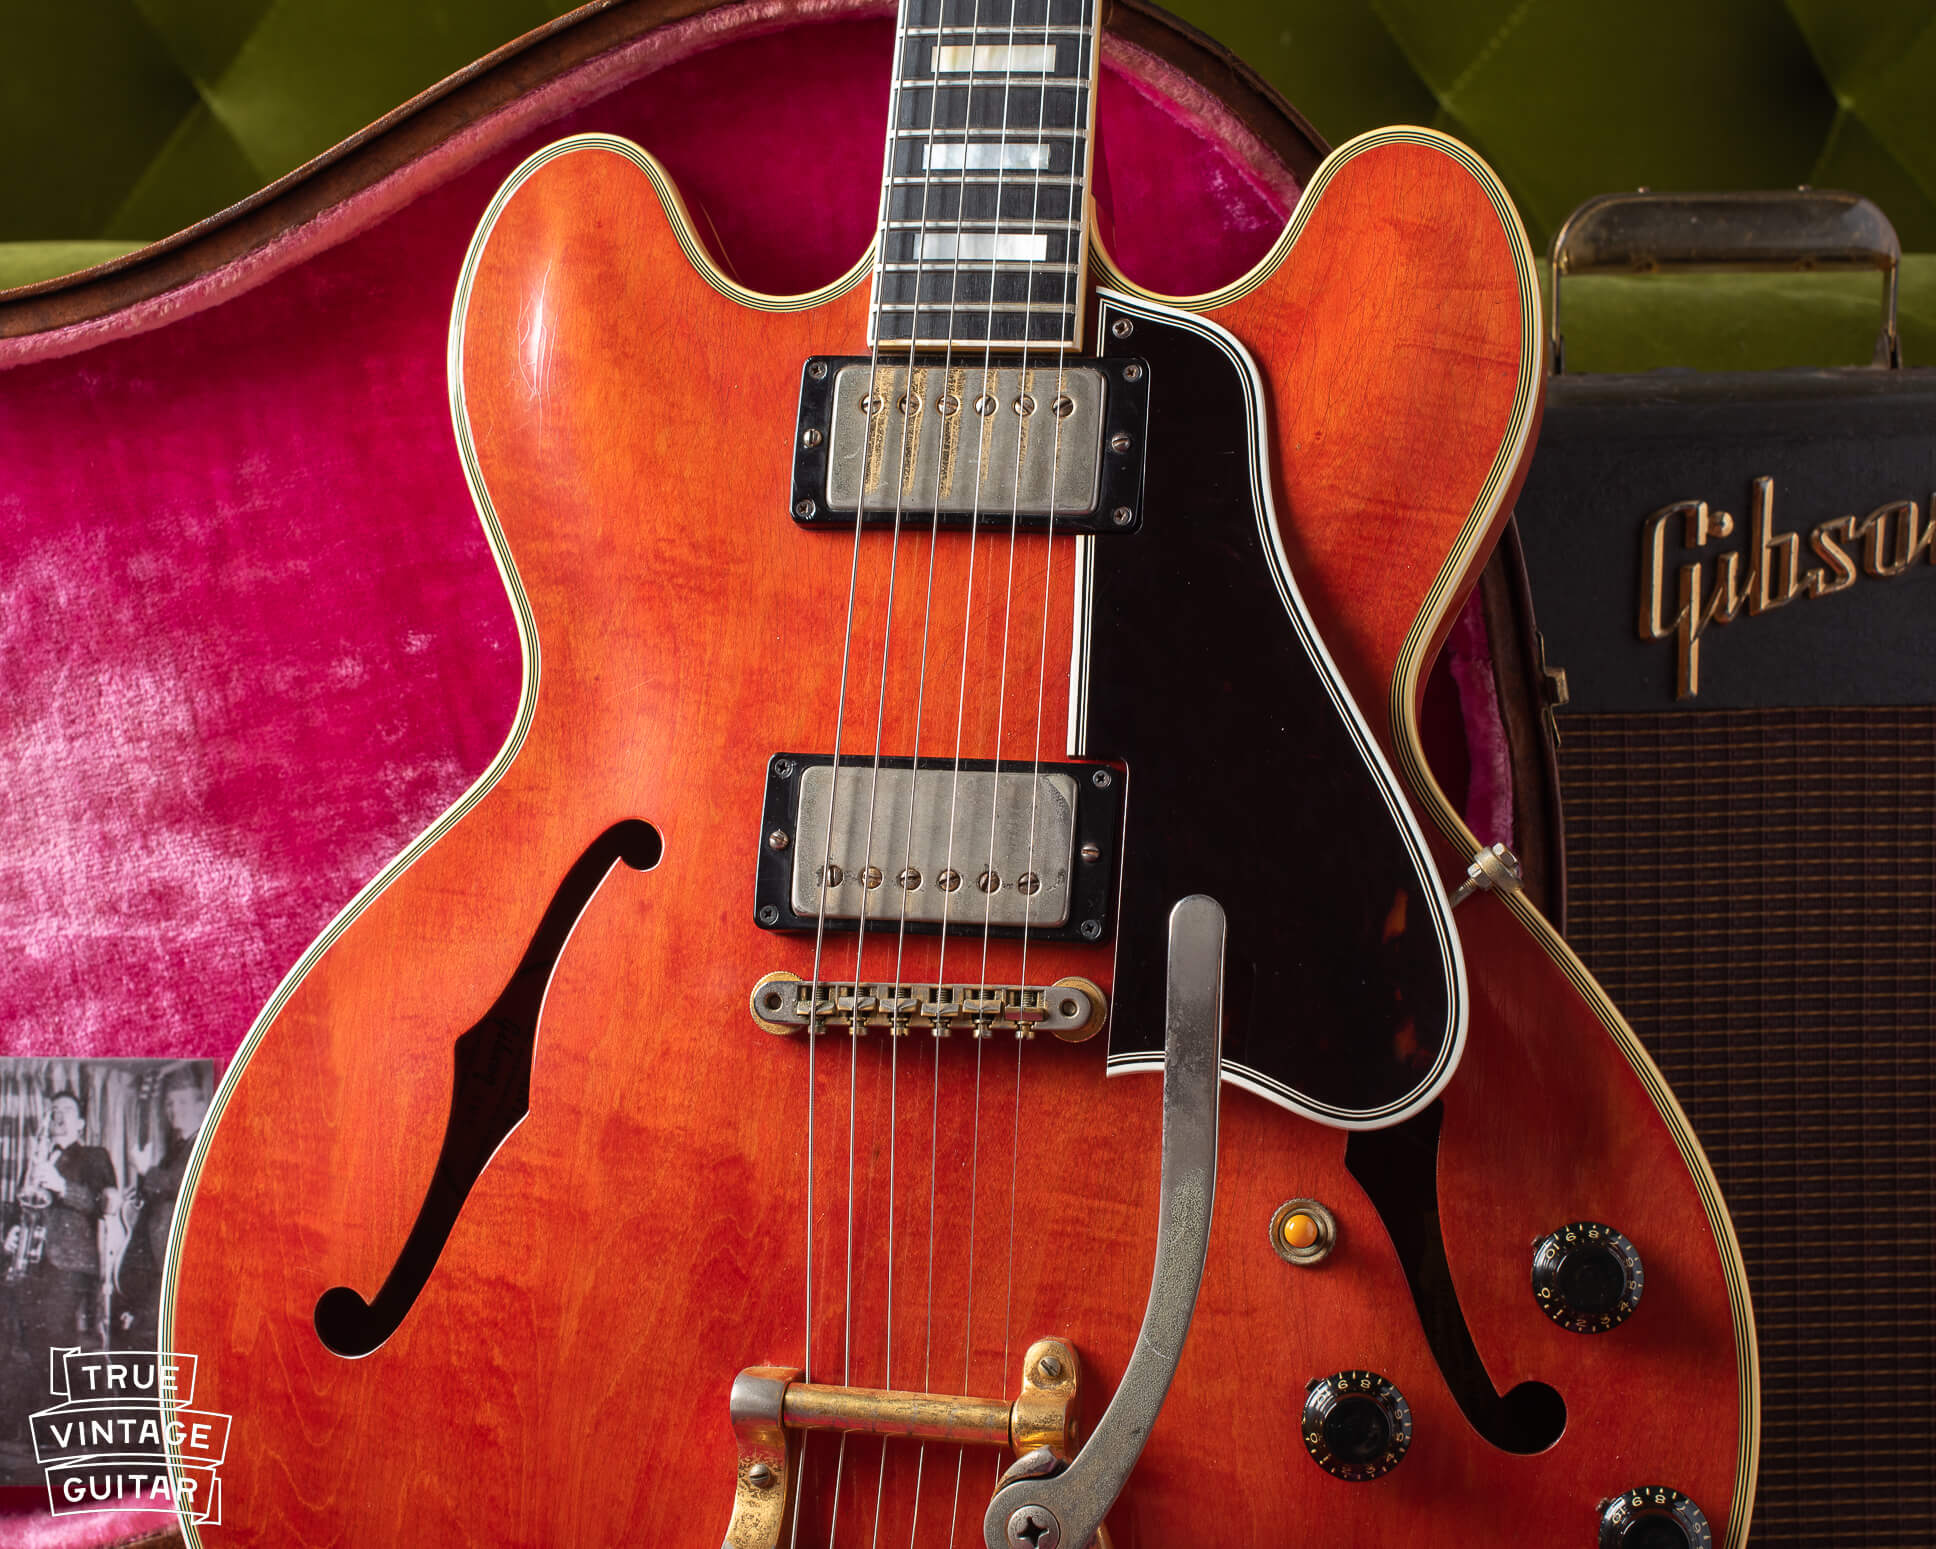 1959 Gibson ES-355 watermelon red with long pickguard